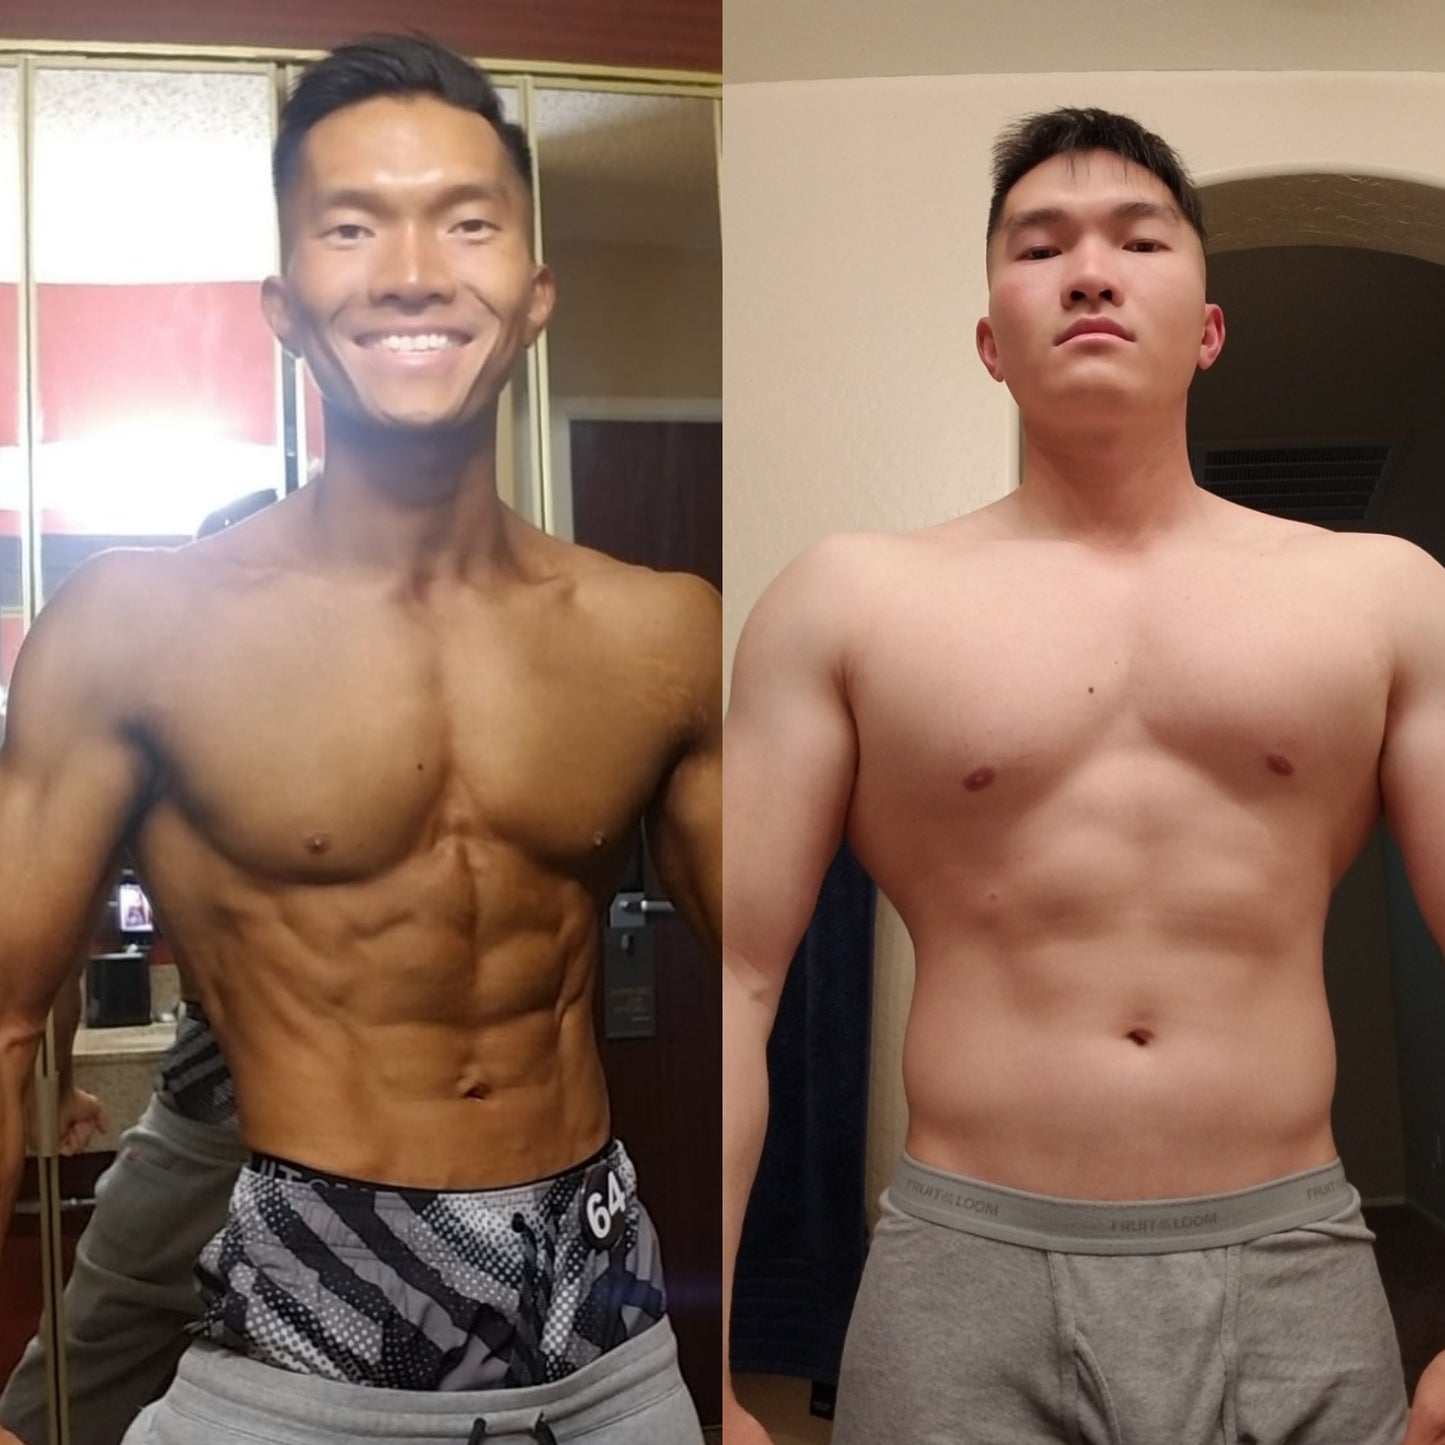 16-WEEK LIFESTYLE TRANSFORMATION PACKAGE